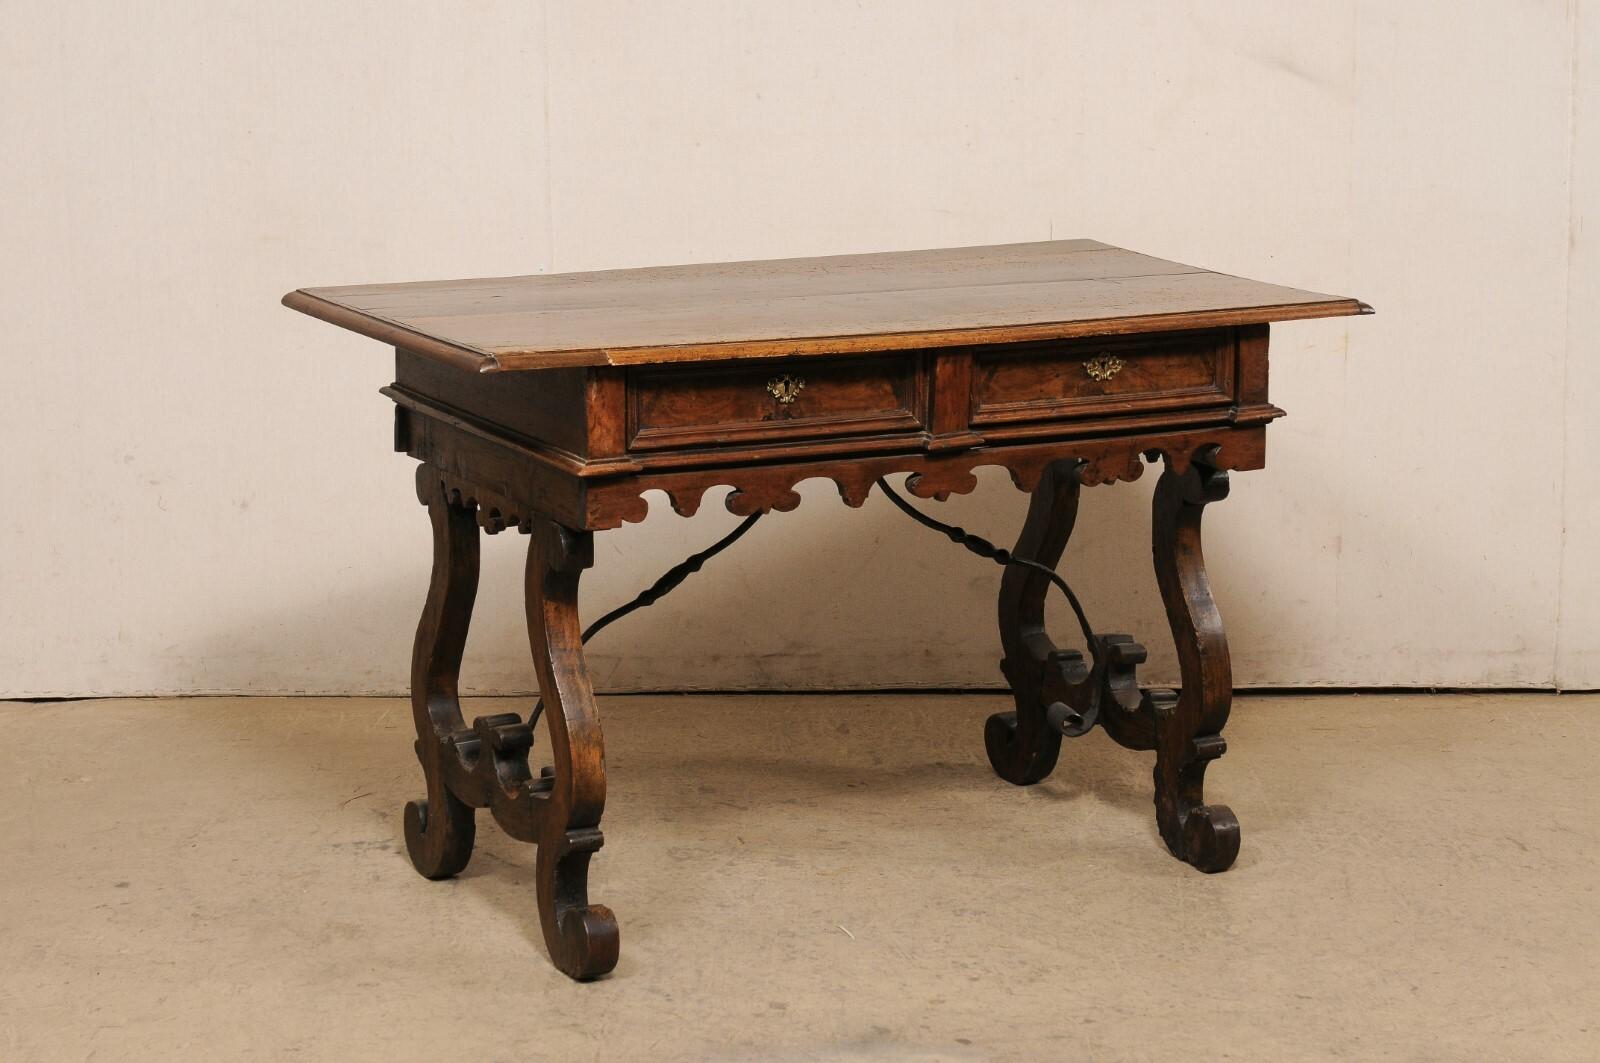 An Italian carved-wood table with lyre legs and iron stretcher from the turn of the 18th and 19th century. This antique table from Italy, in typical 